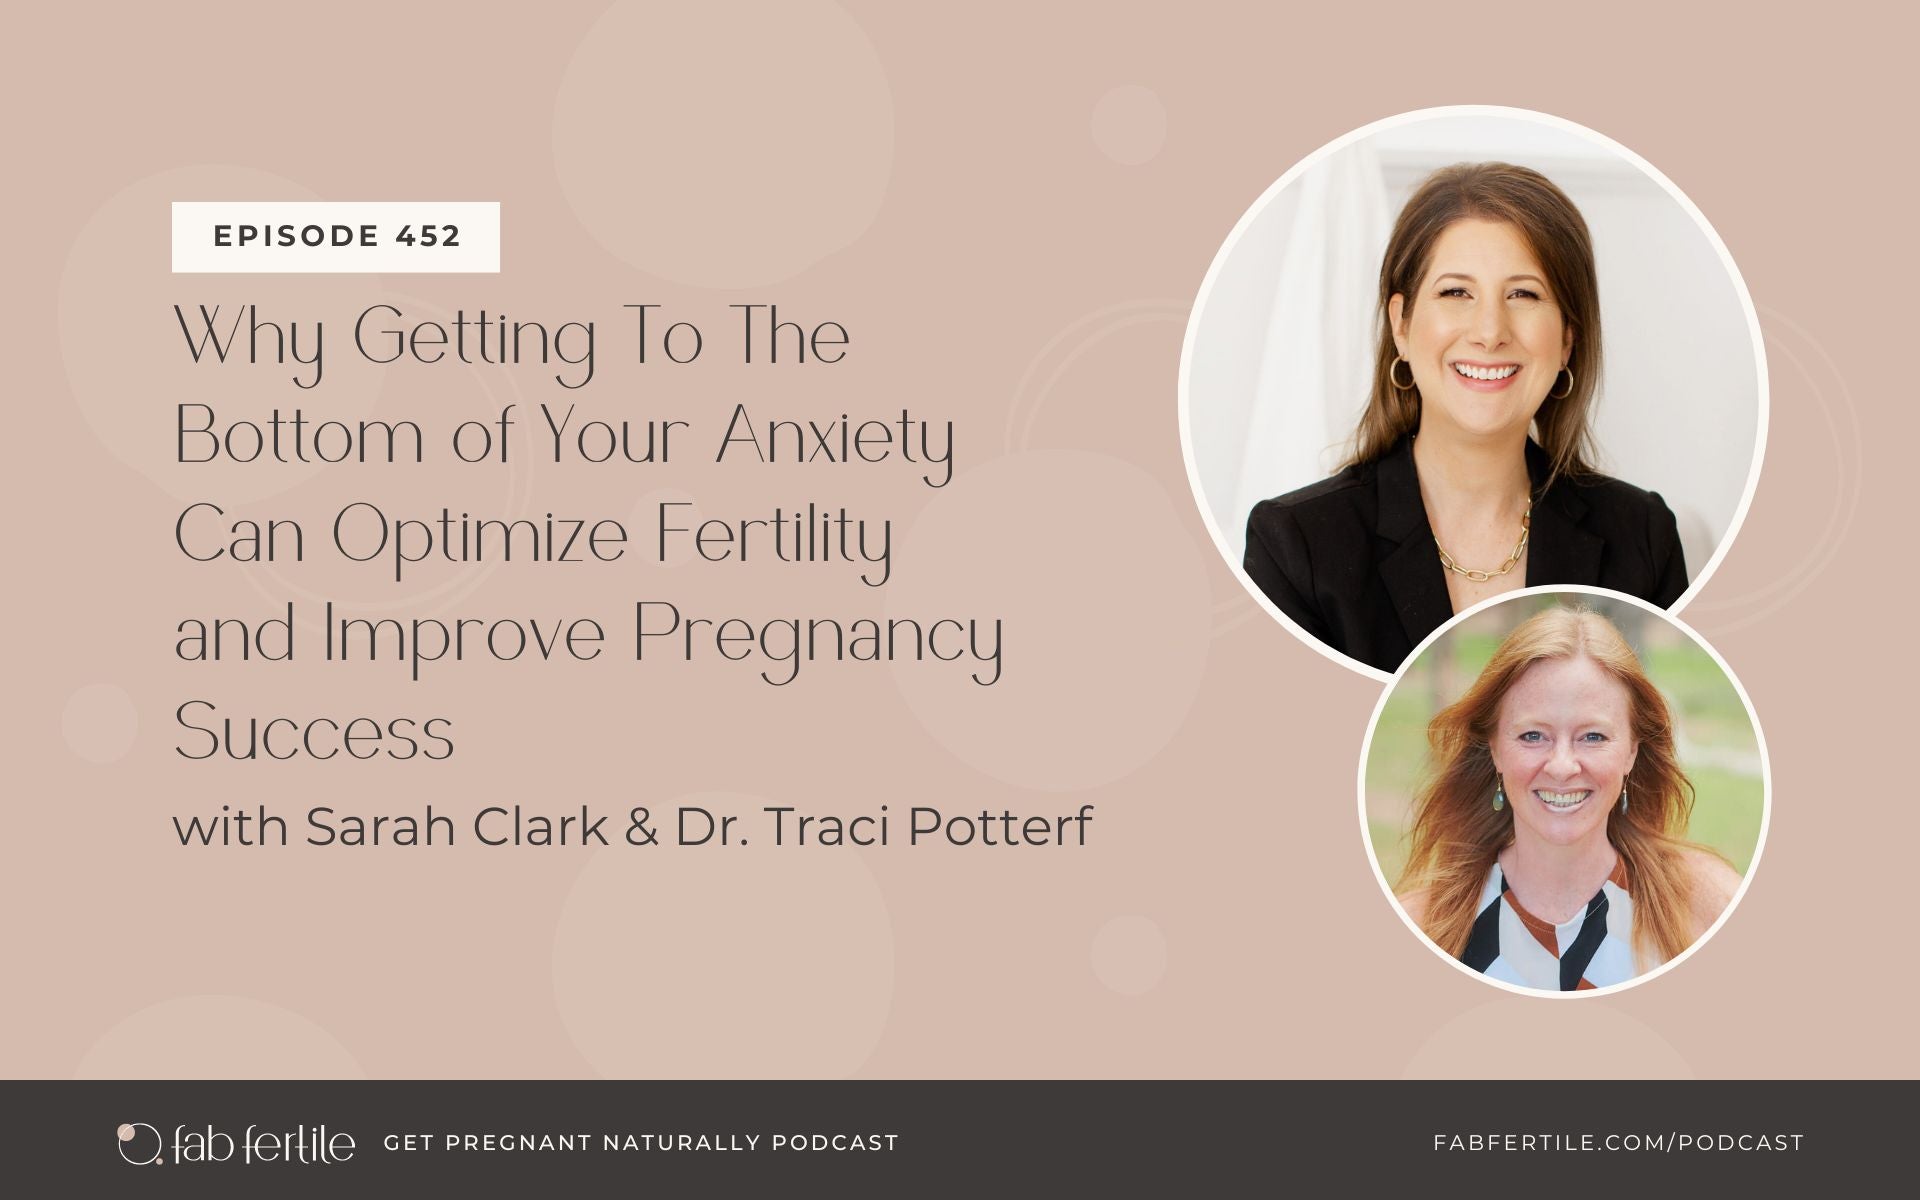 Why Getting To The Bottom of Your Anxiety Can Optimize Fertility and Improve Pregnancy Success with Dr. Traci Potterf